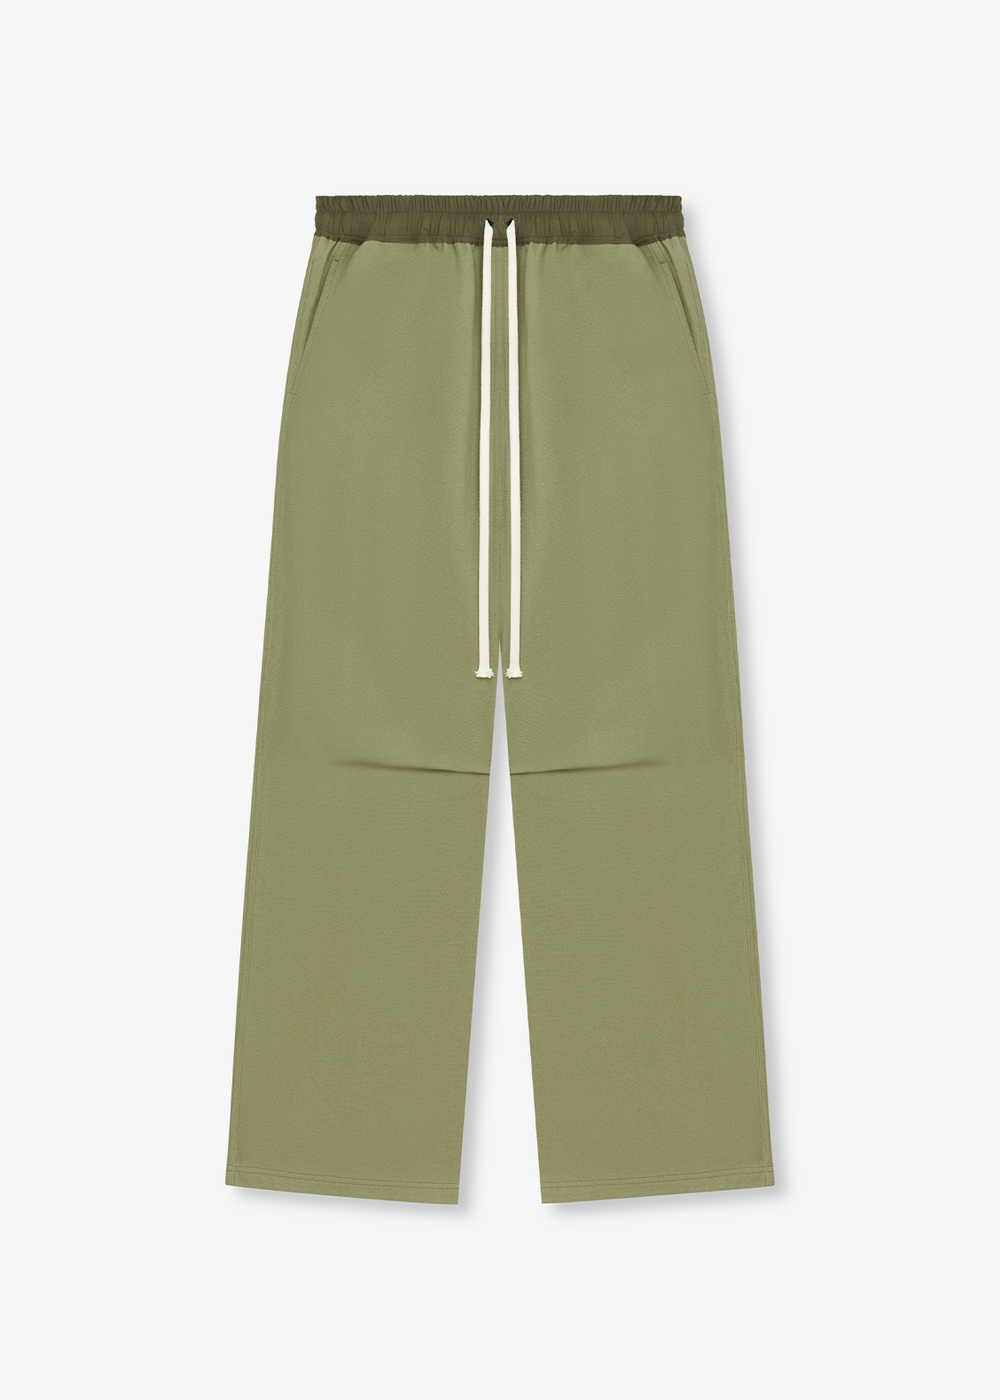 Solace Theory - Cotton Canvas Pant / Militia | SOLACE THEORY | Mad About The Boy